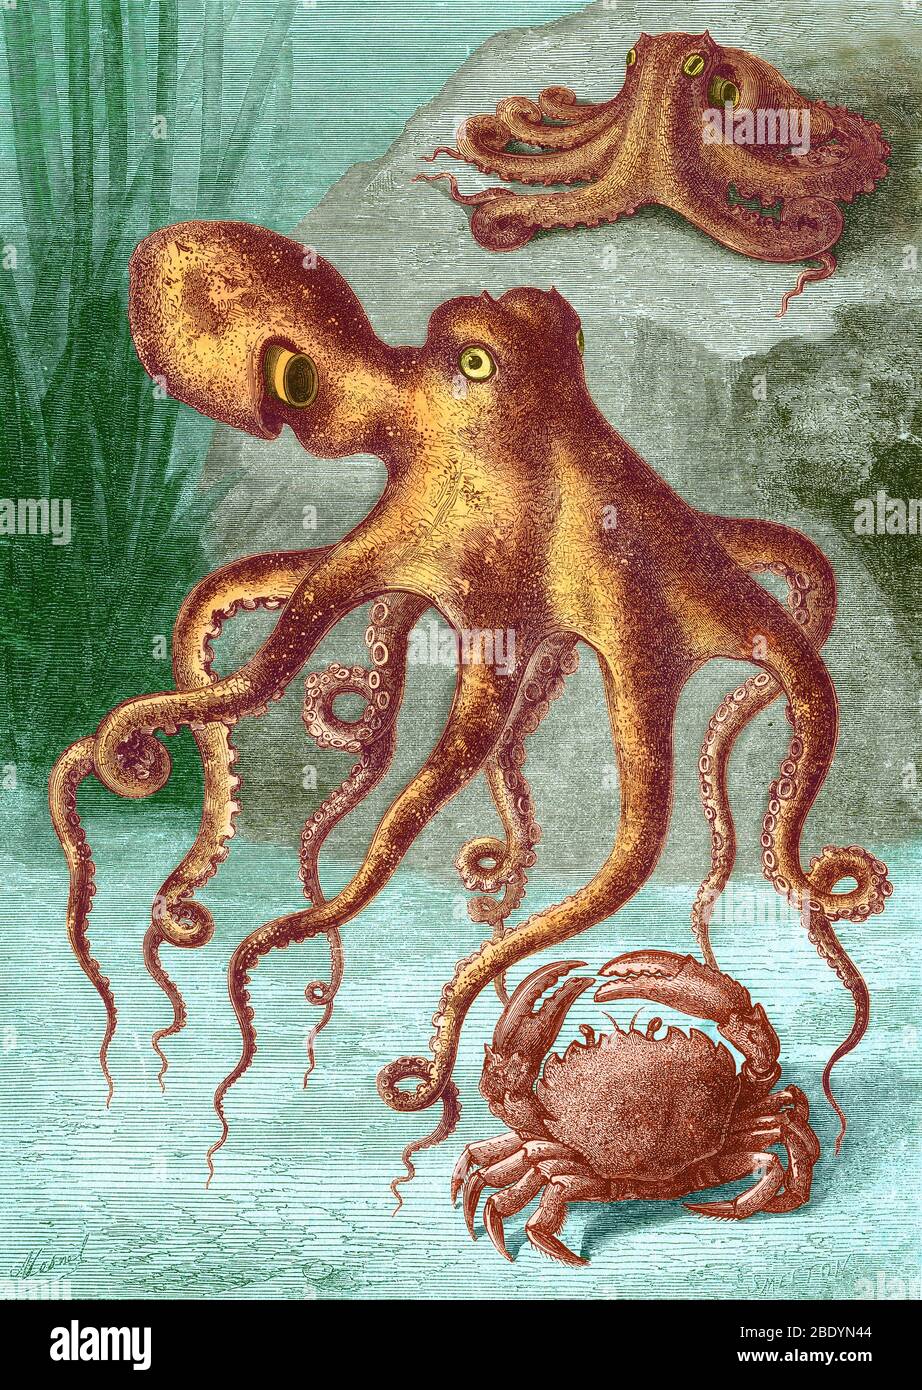 Octopi and Crab, 1833 Stock Photo